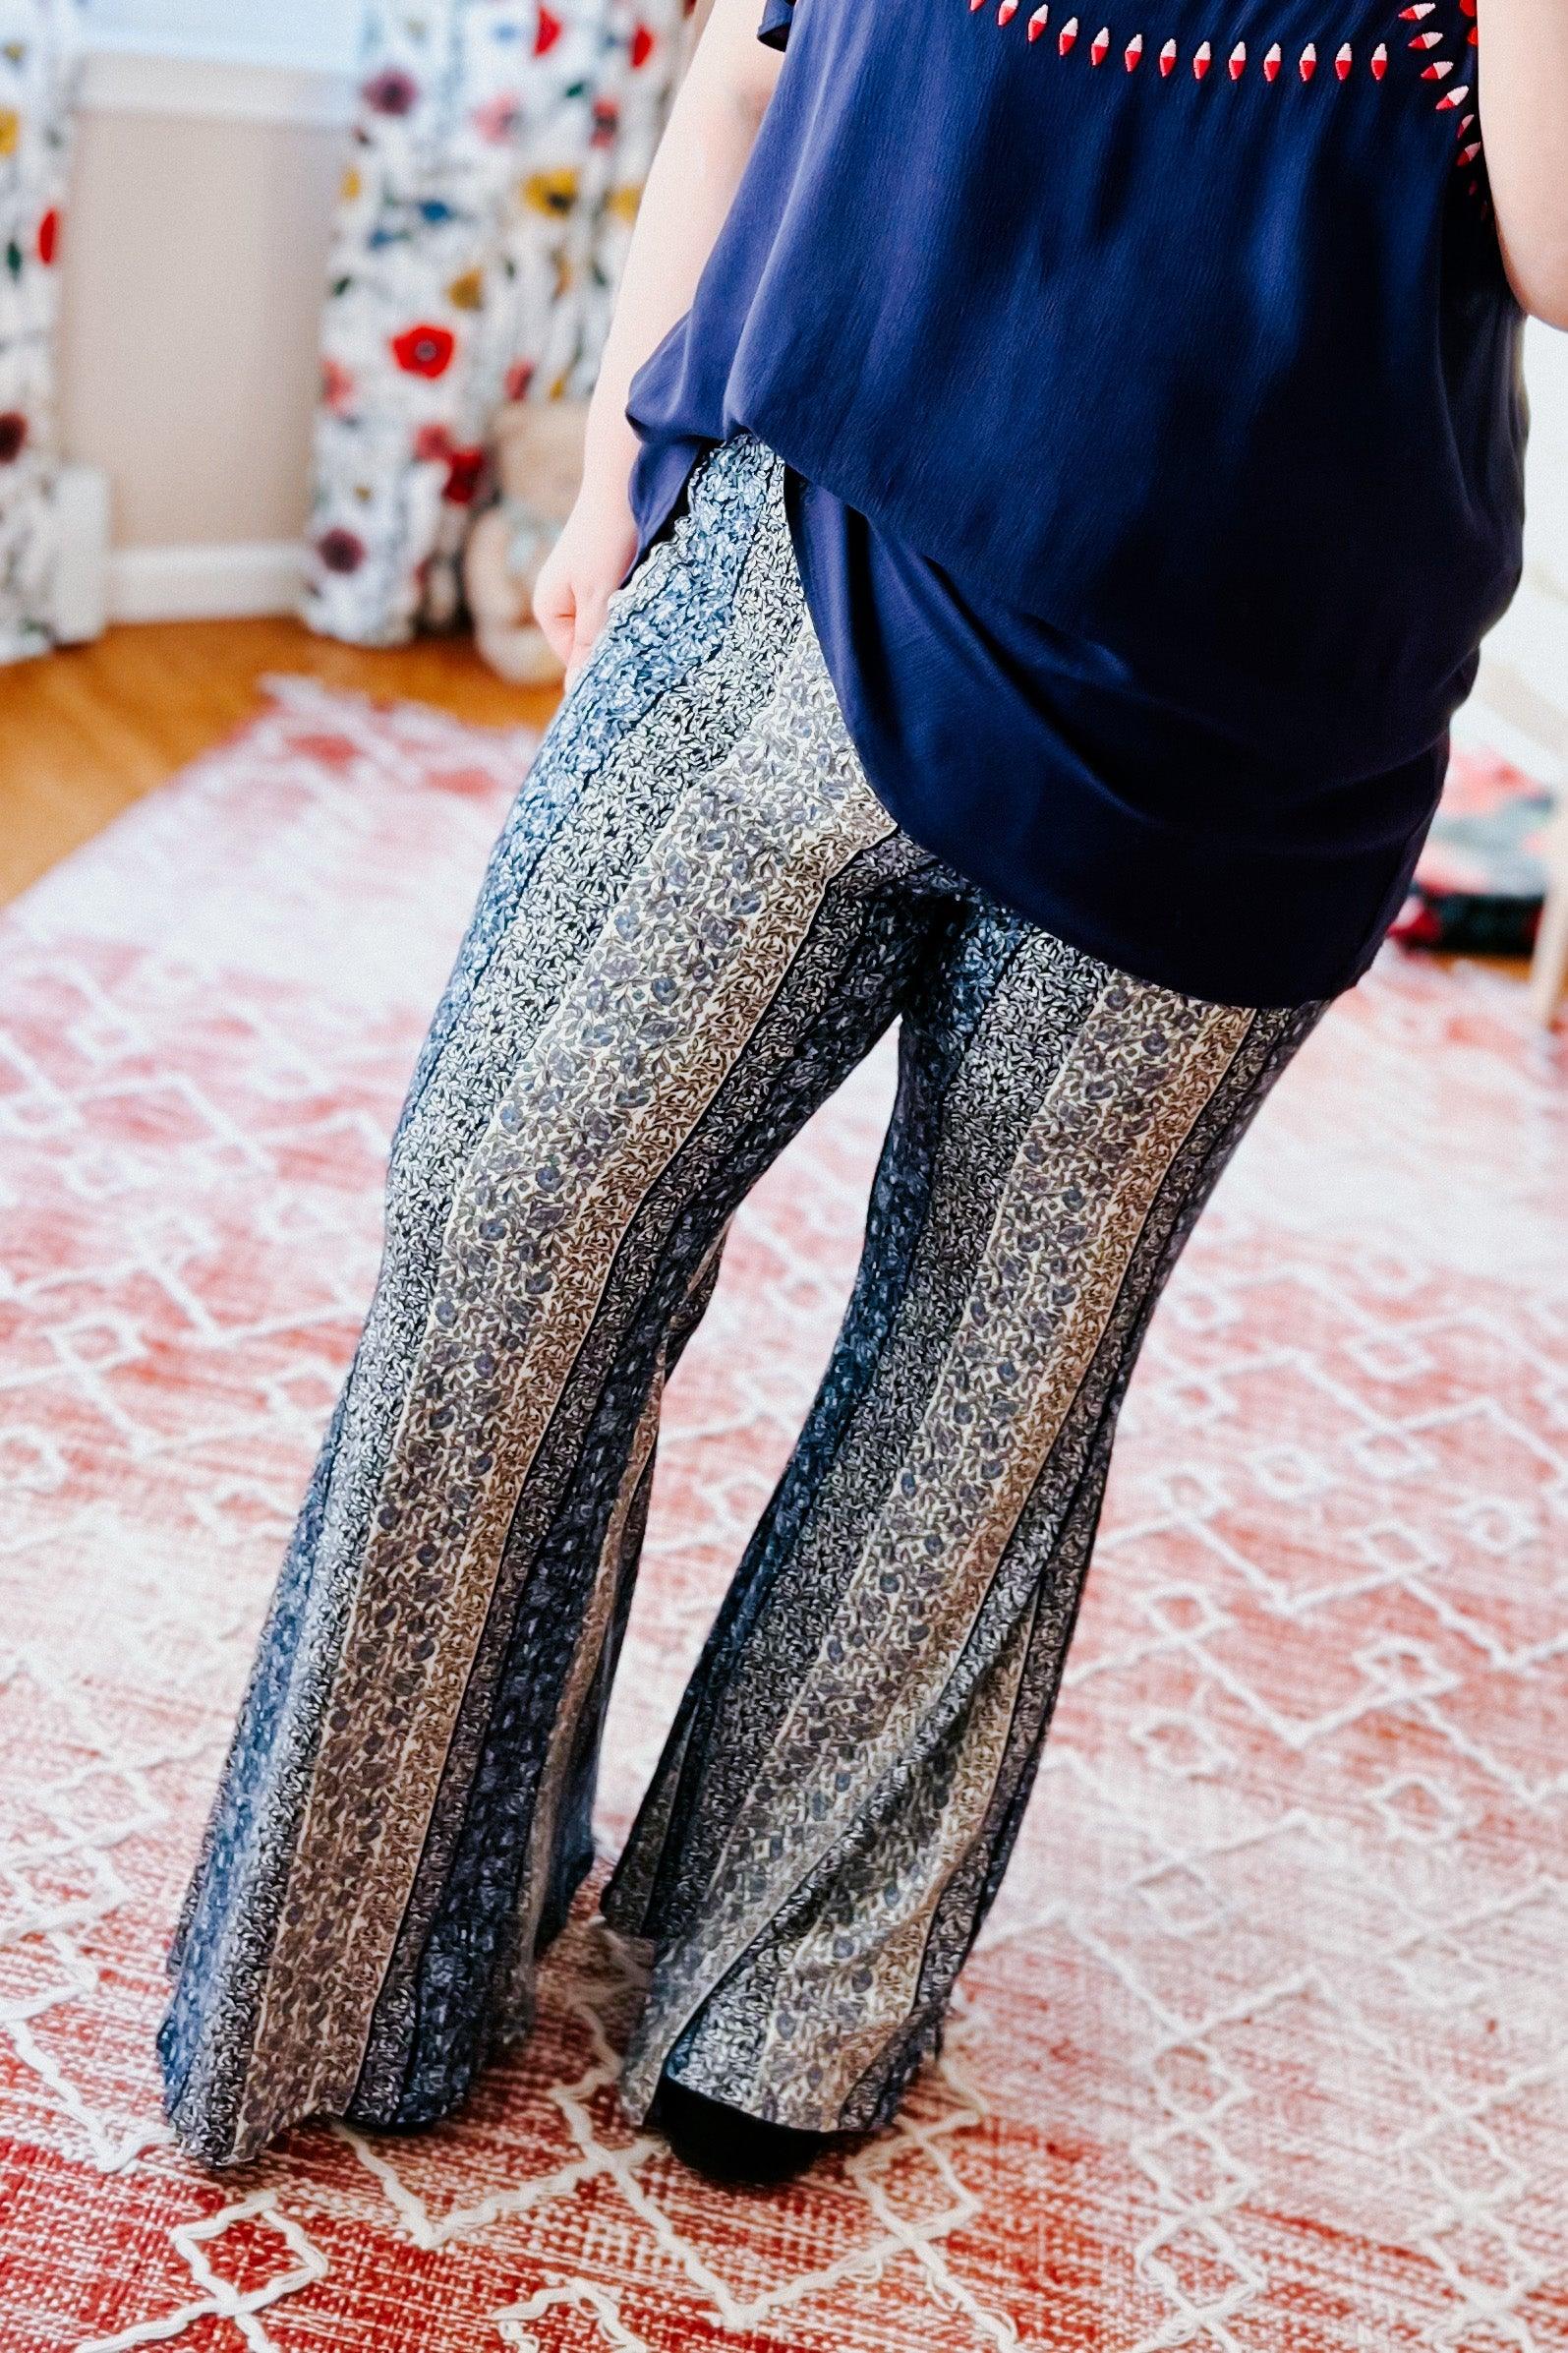 Fleetwood Floral Bell Bottoms - Atomic Wildflower